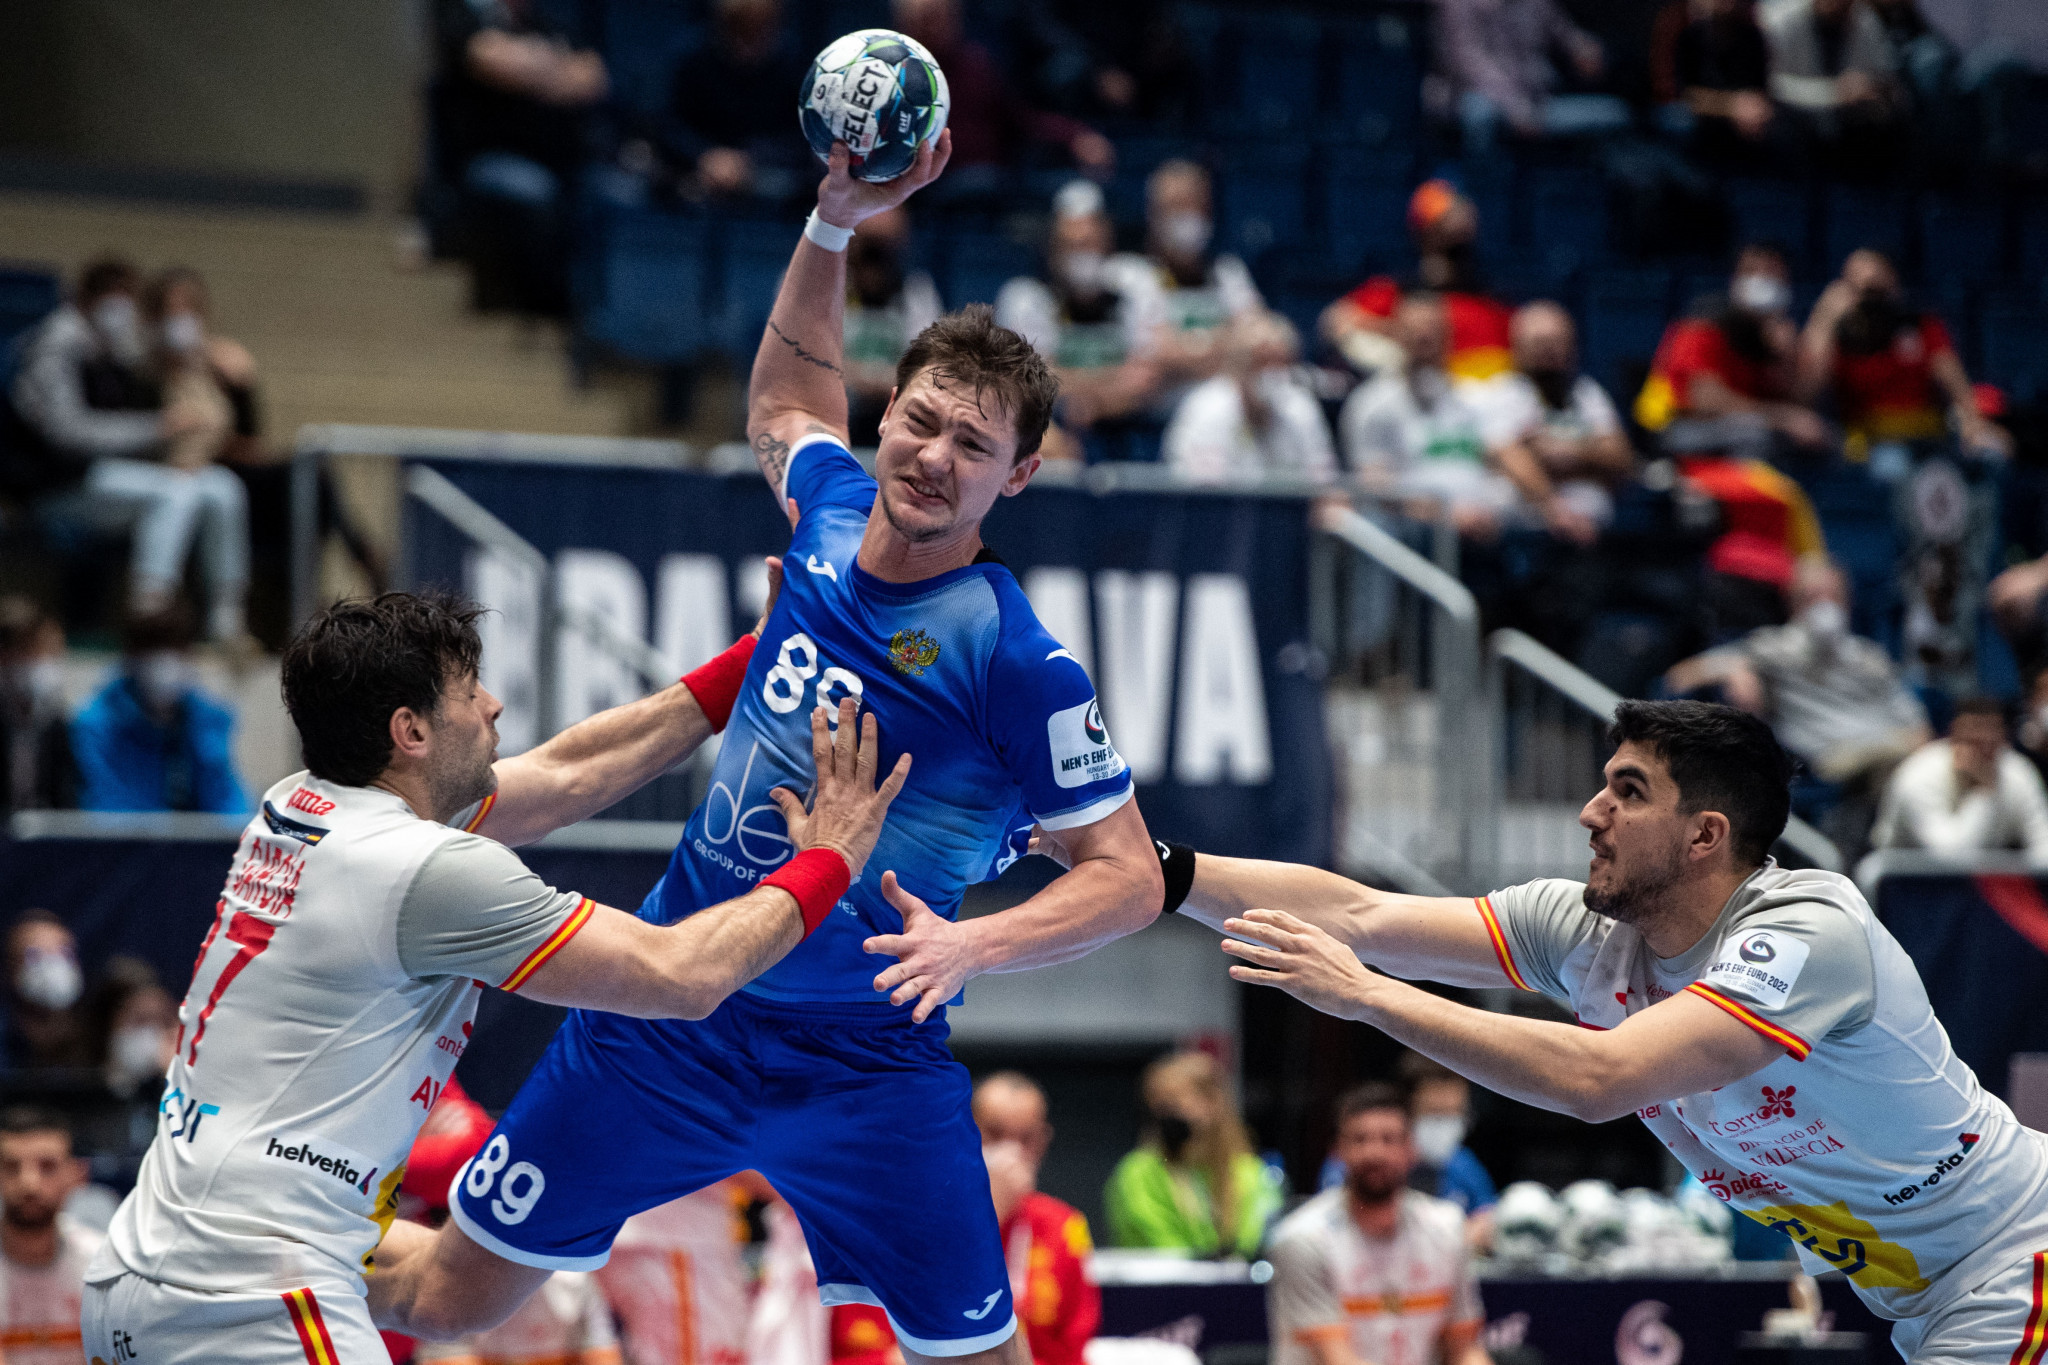 Russia's appeal against the decision to ban the country's teams from competition has been rejected by the EHF Court of Handball ©Getty Images